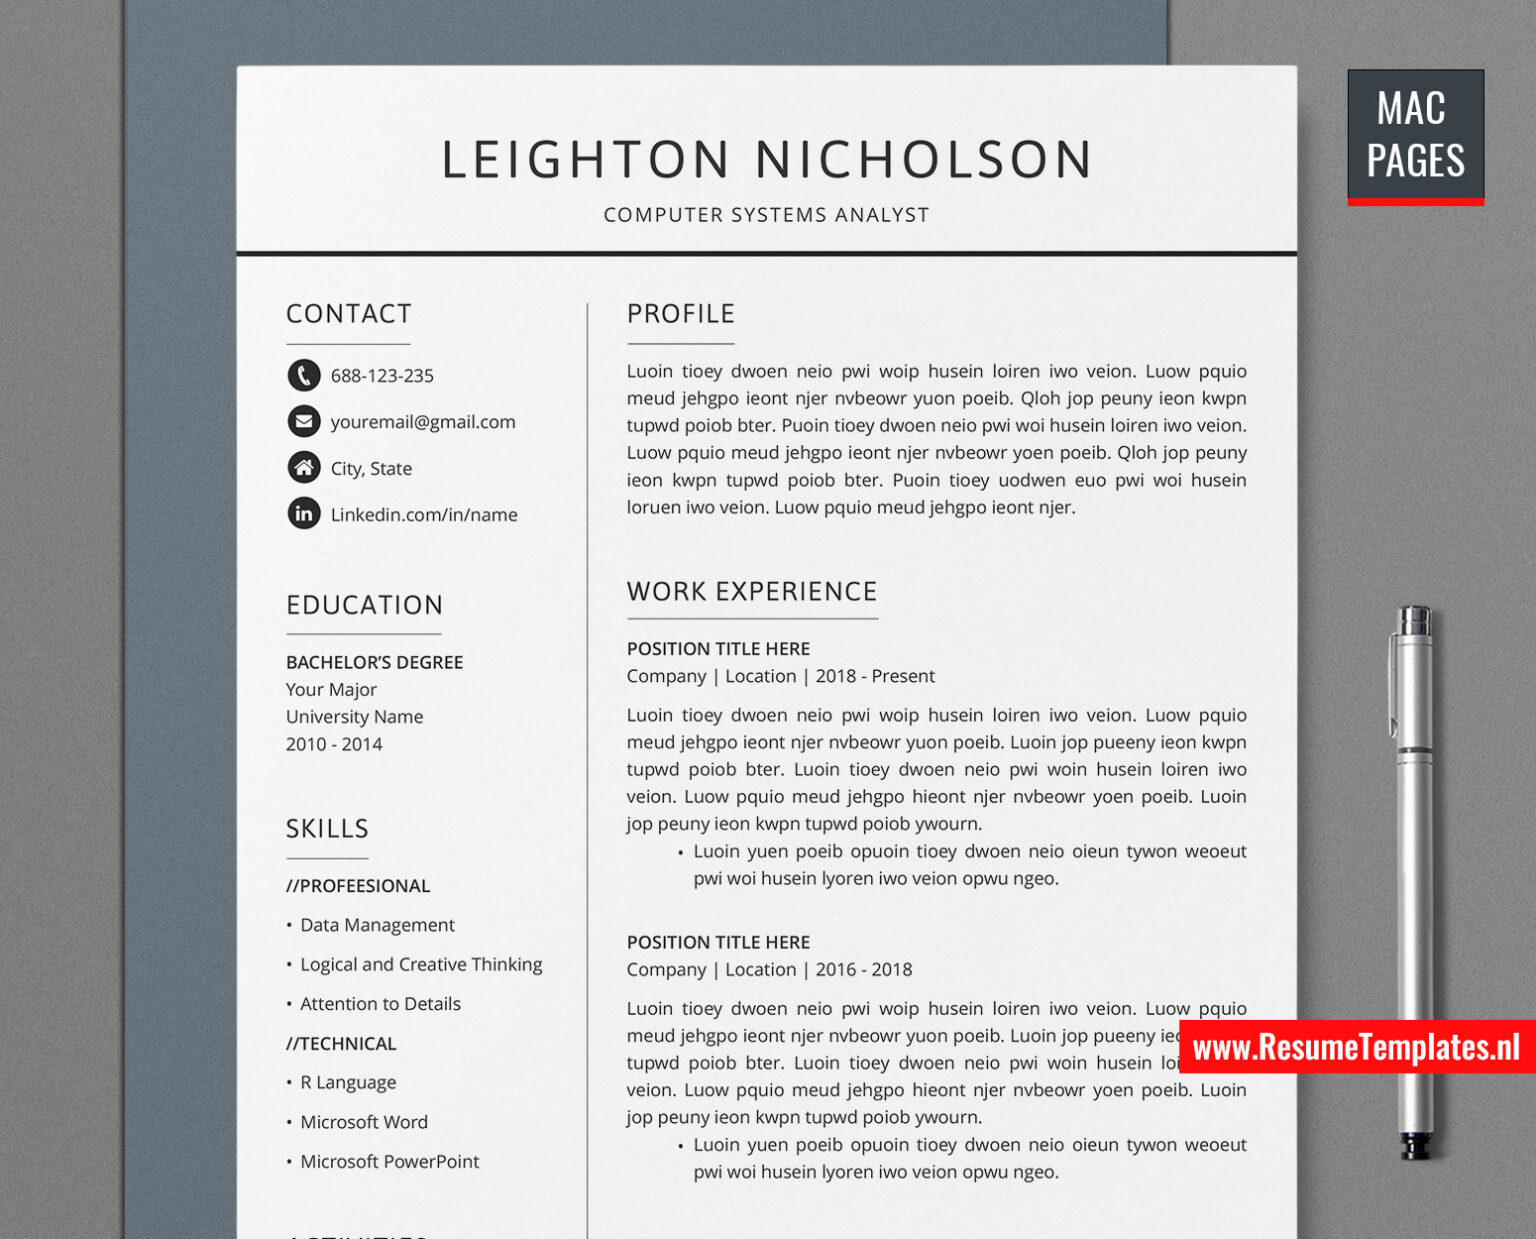 For Mac Pages: Simple CV Template / Resume Template for Mac Pages ...